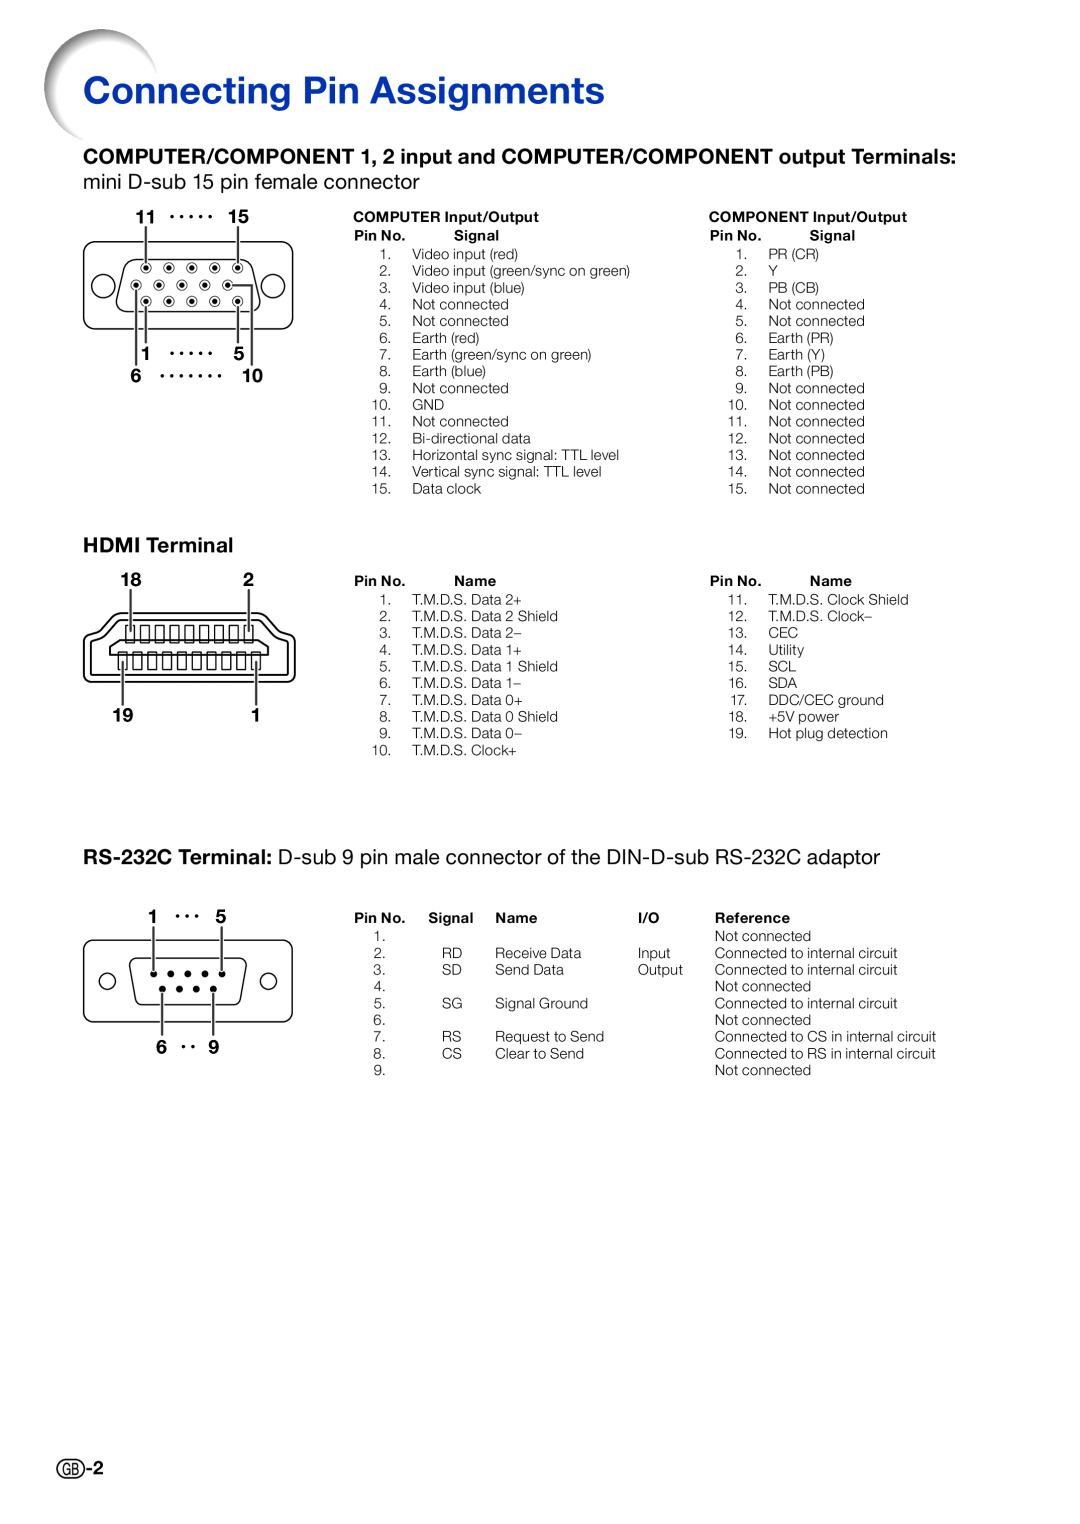 Sharp XG-SV200X Connecting Pin Assignments, COMPUTER/COMPONENT 1, 2 input and COMPUTER/COMPONENT output Terminals 